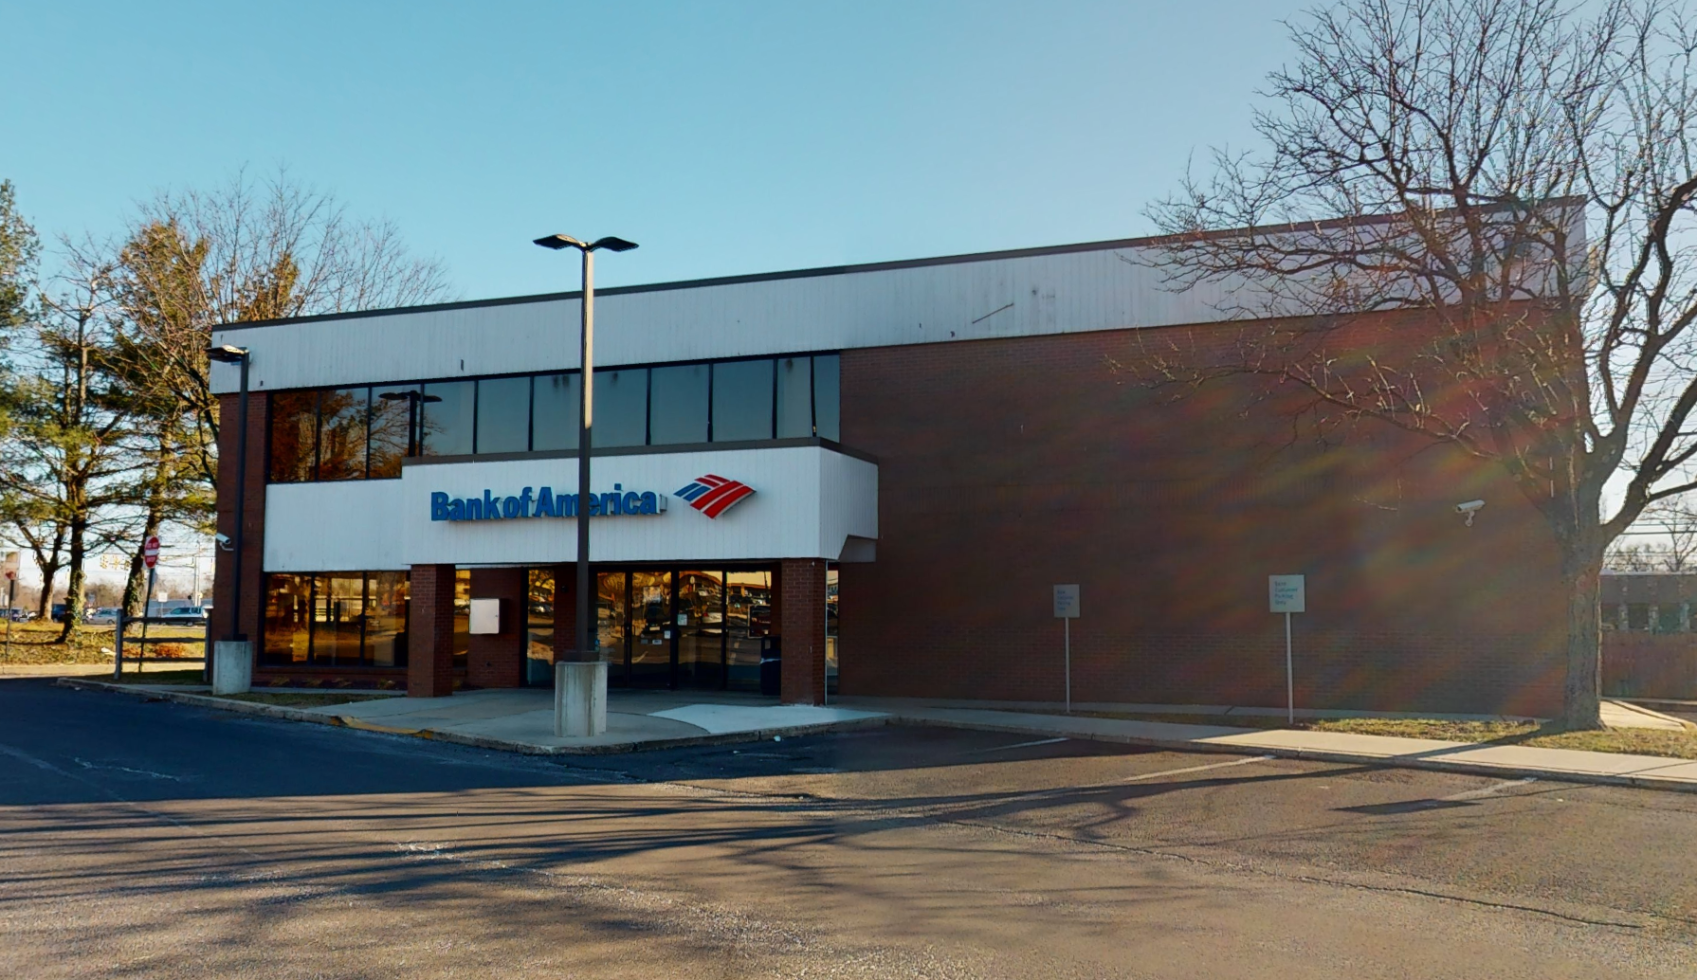 Bank of America financial center with drive-thru ATM | 22 W Marlton Pike, Cherry Hill, NJ 08002